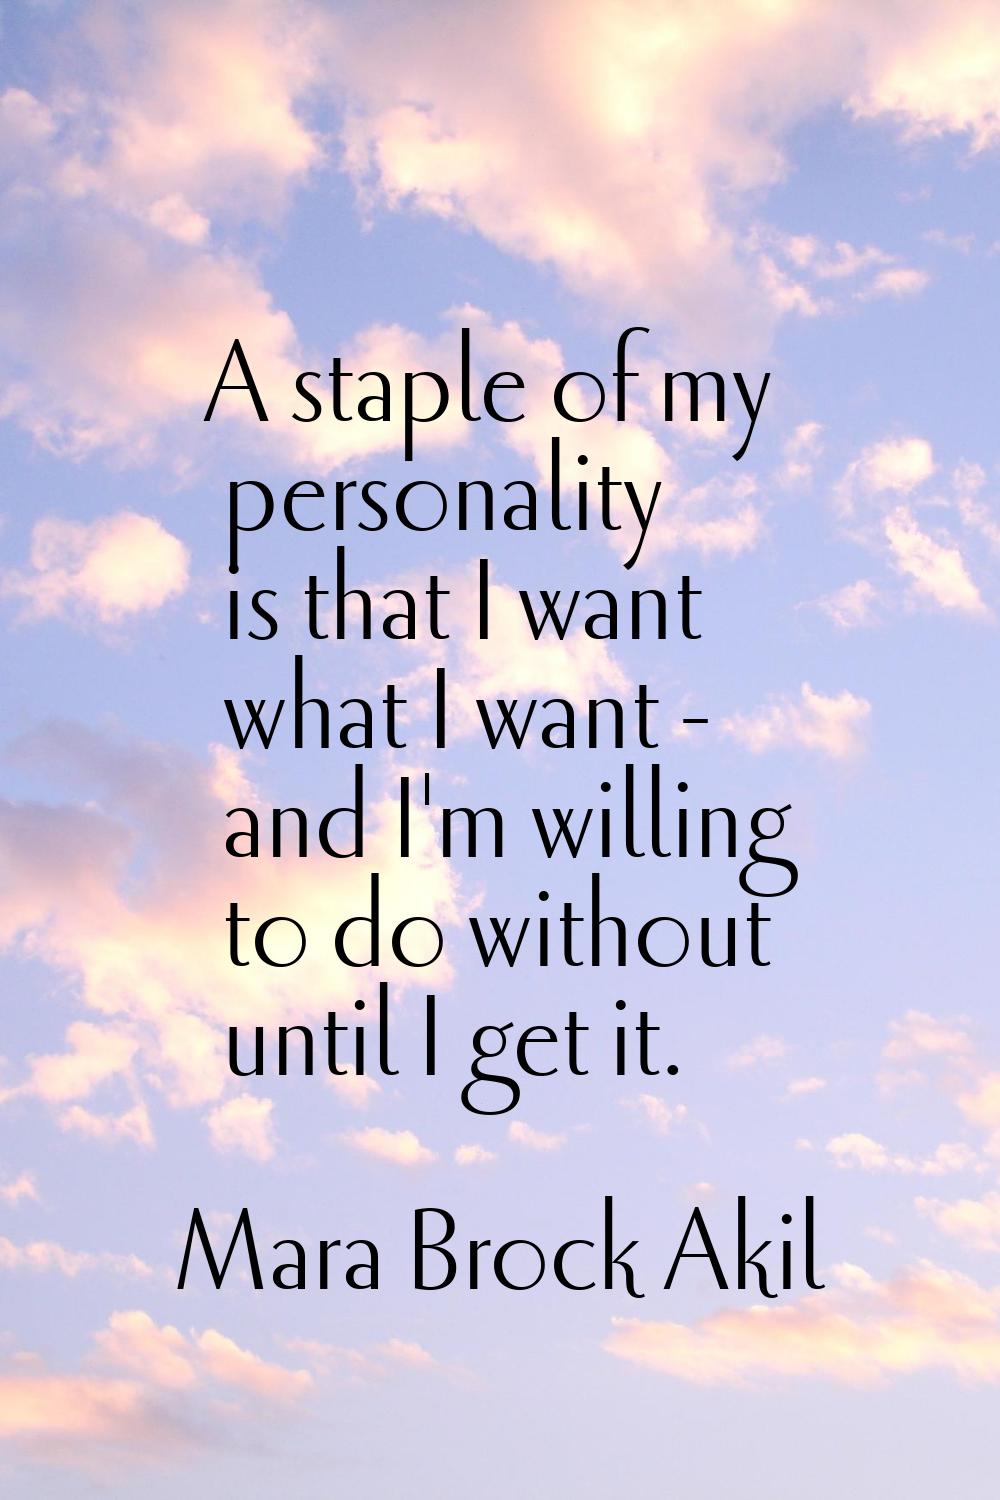 A staple of my personality is that I want what I want - and I'm willing to do without until I get i